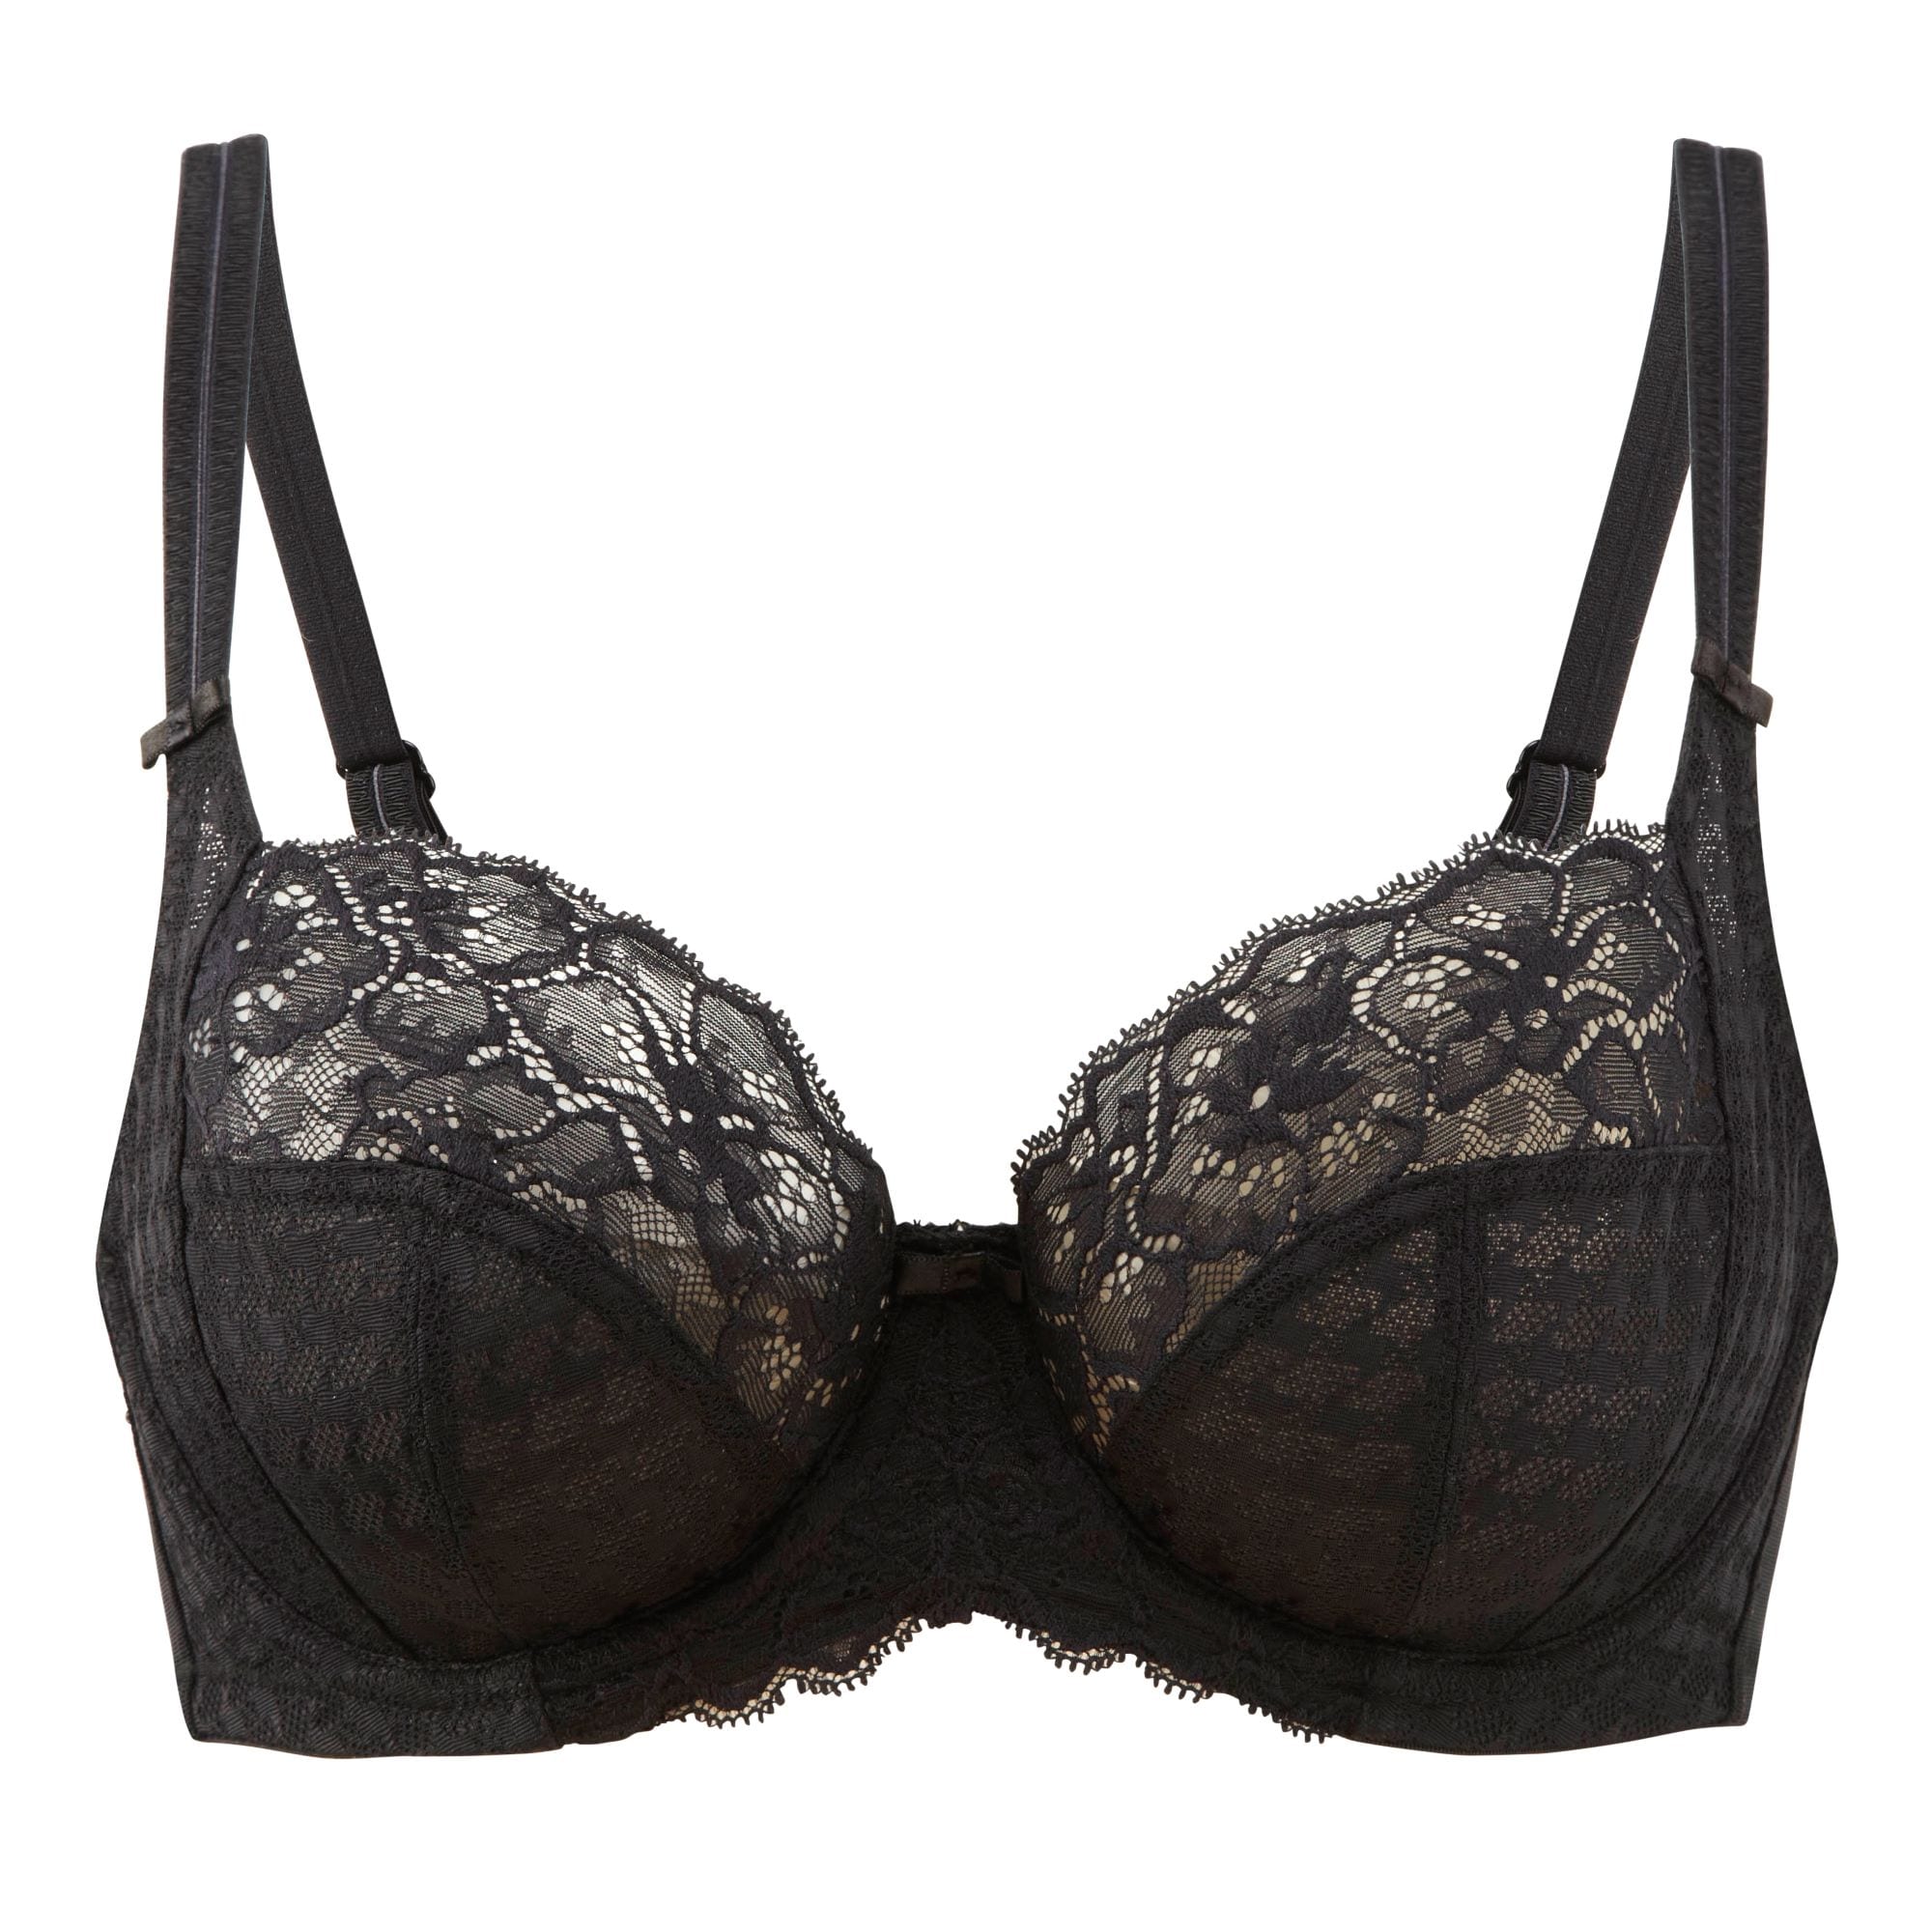 Panache Envy  7285 Full Cup – Your Bra Store